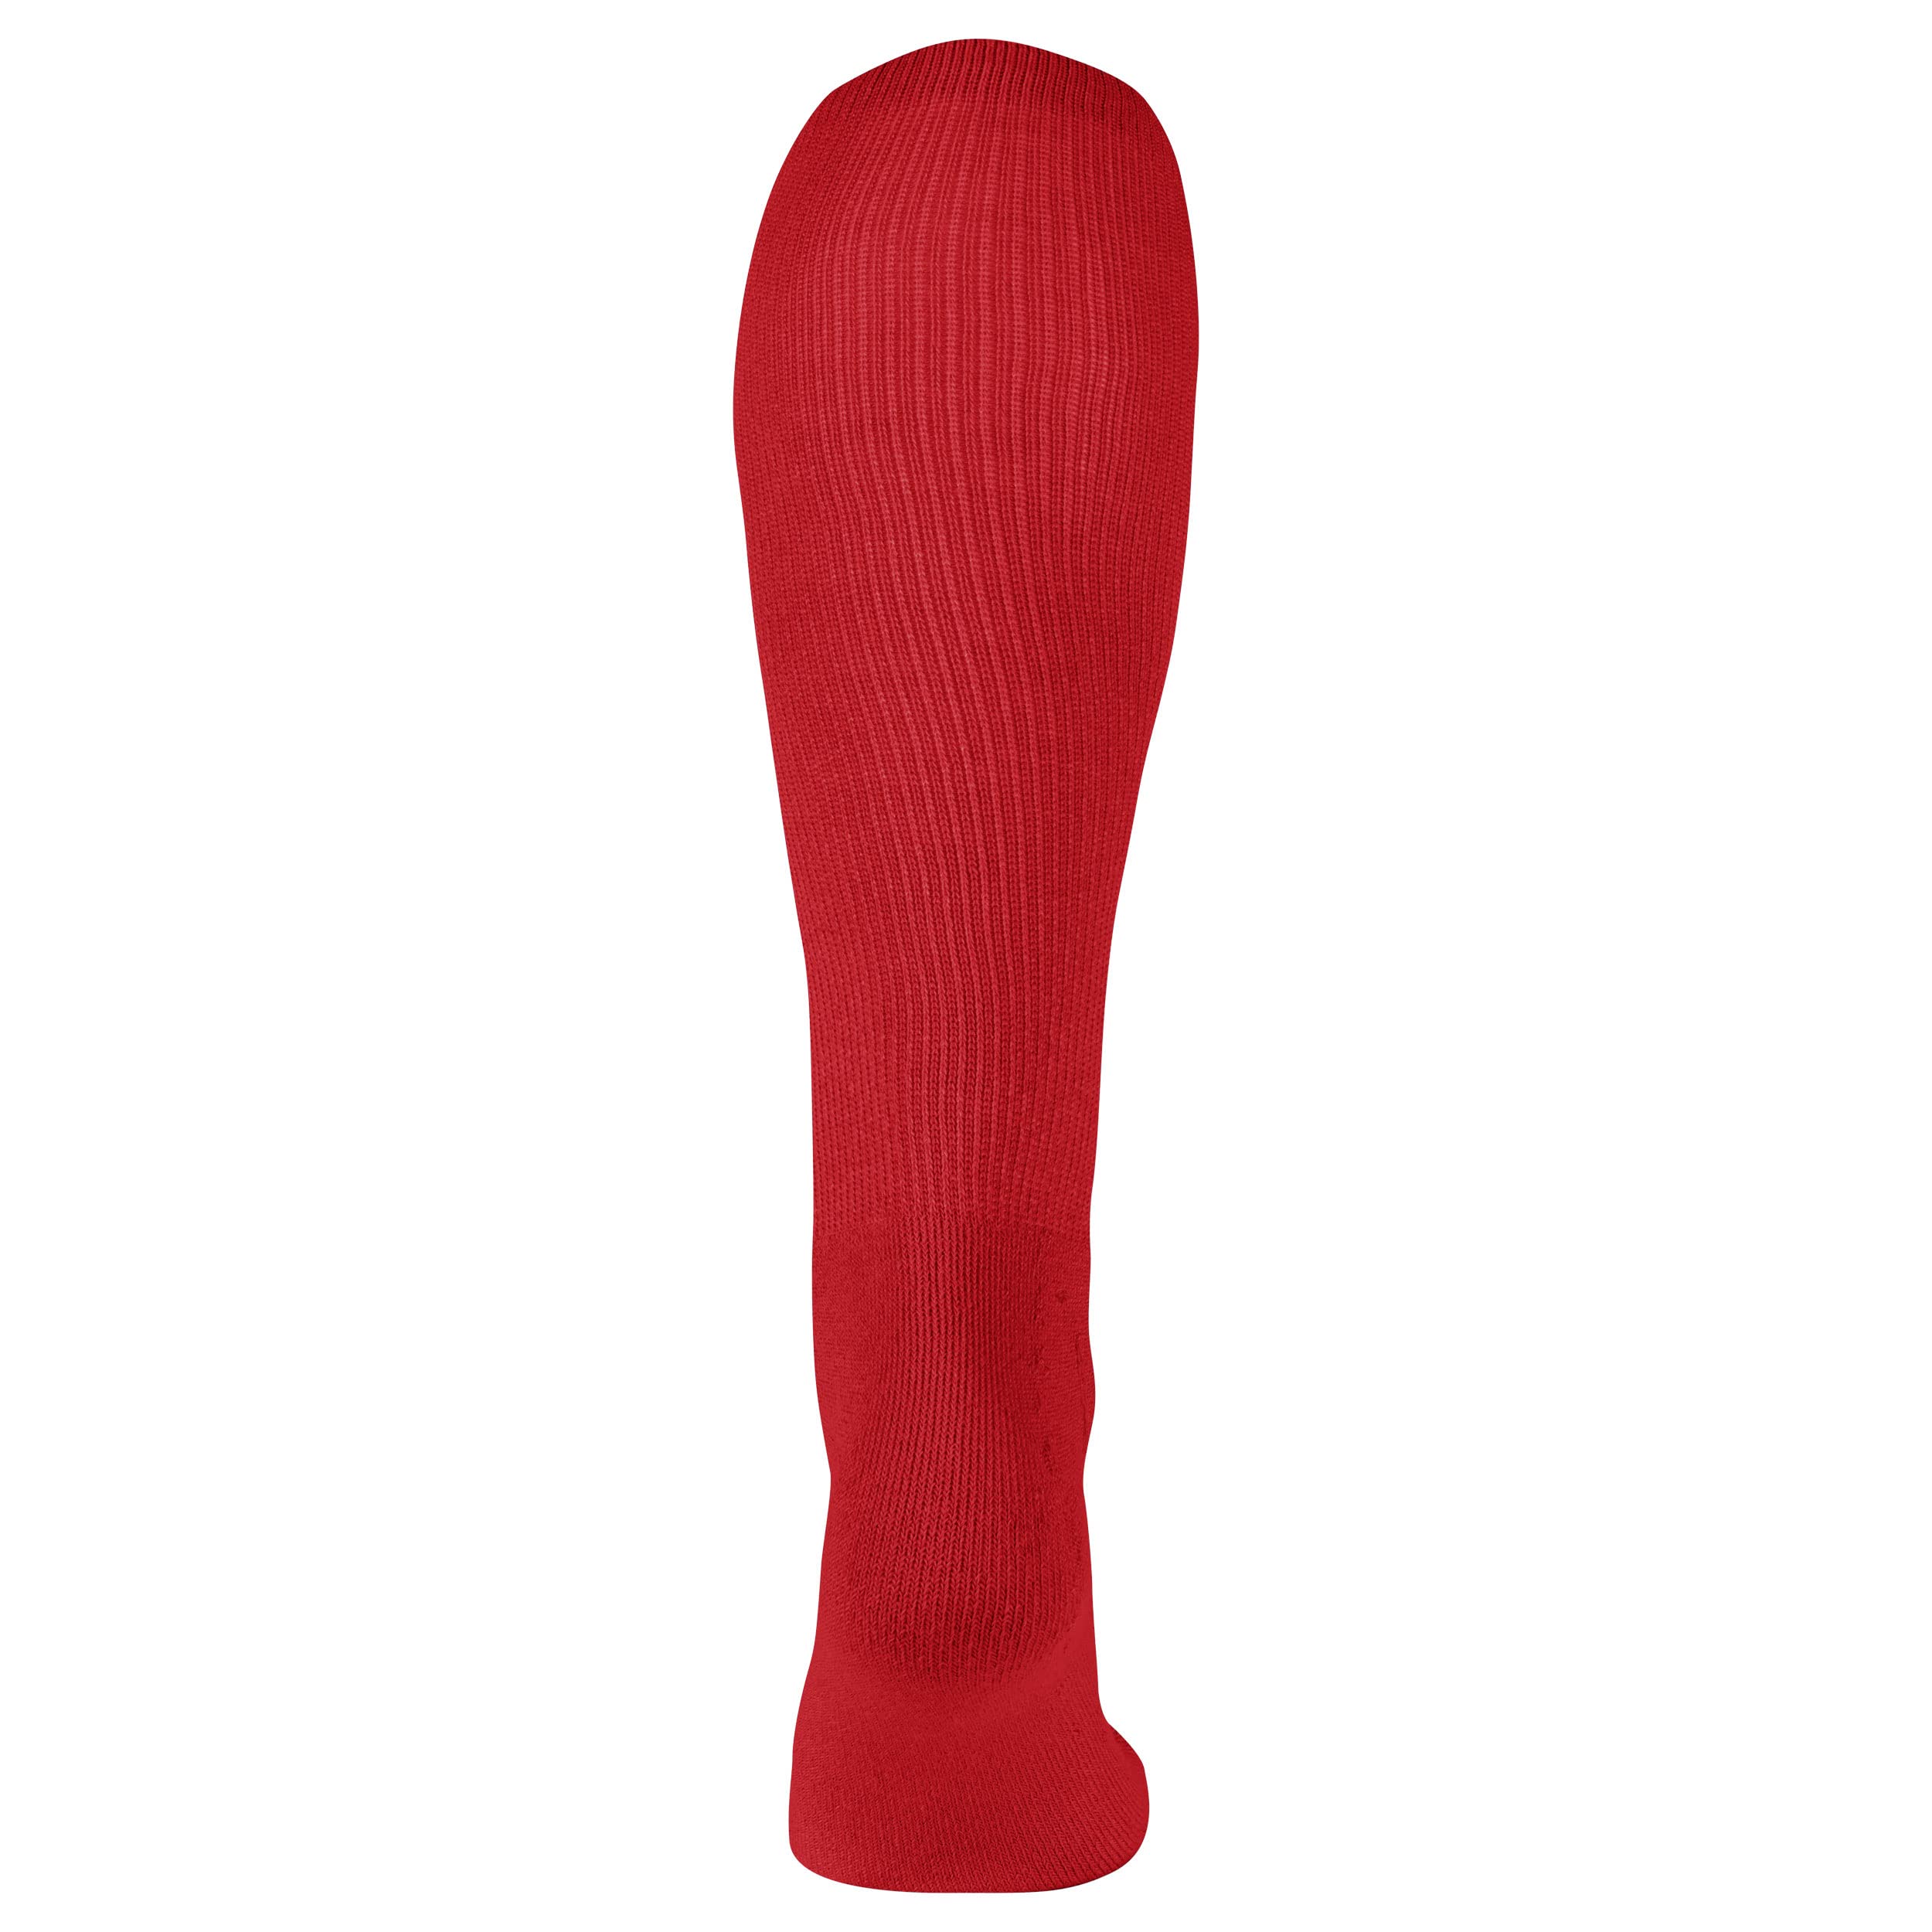 CHAMPRO Multi-Sport Athletic Compression Socks for Baseball, Softball, Football, and More